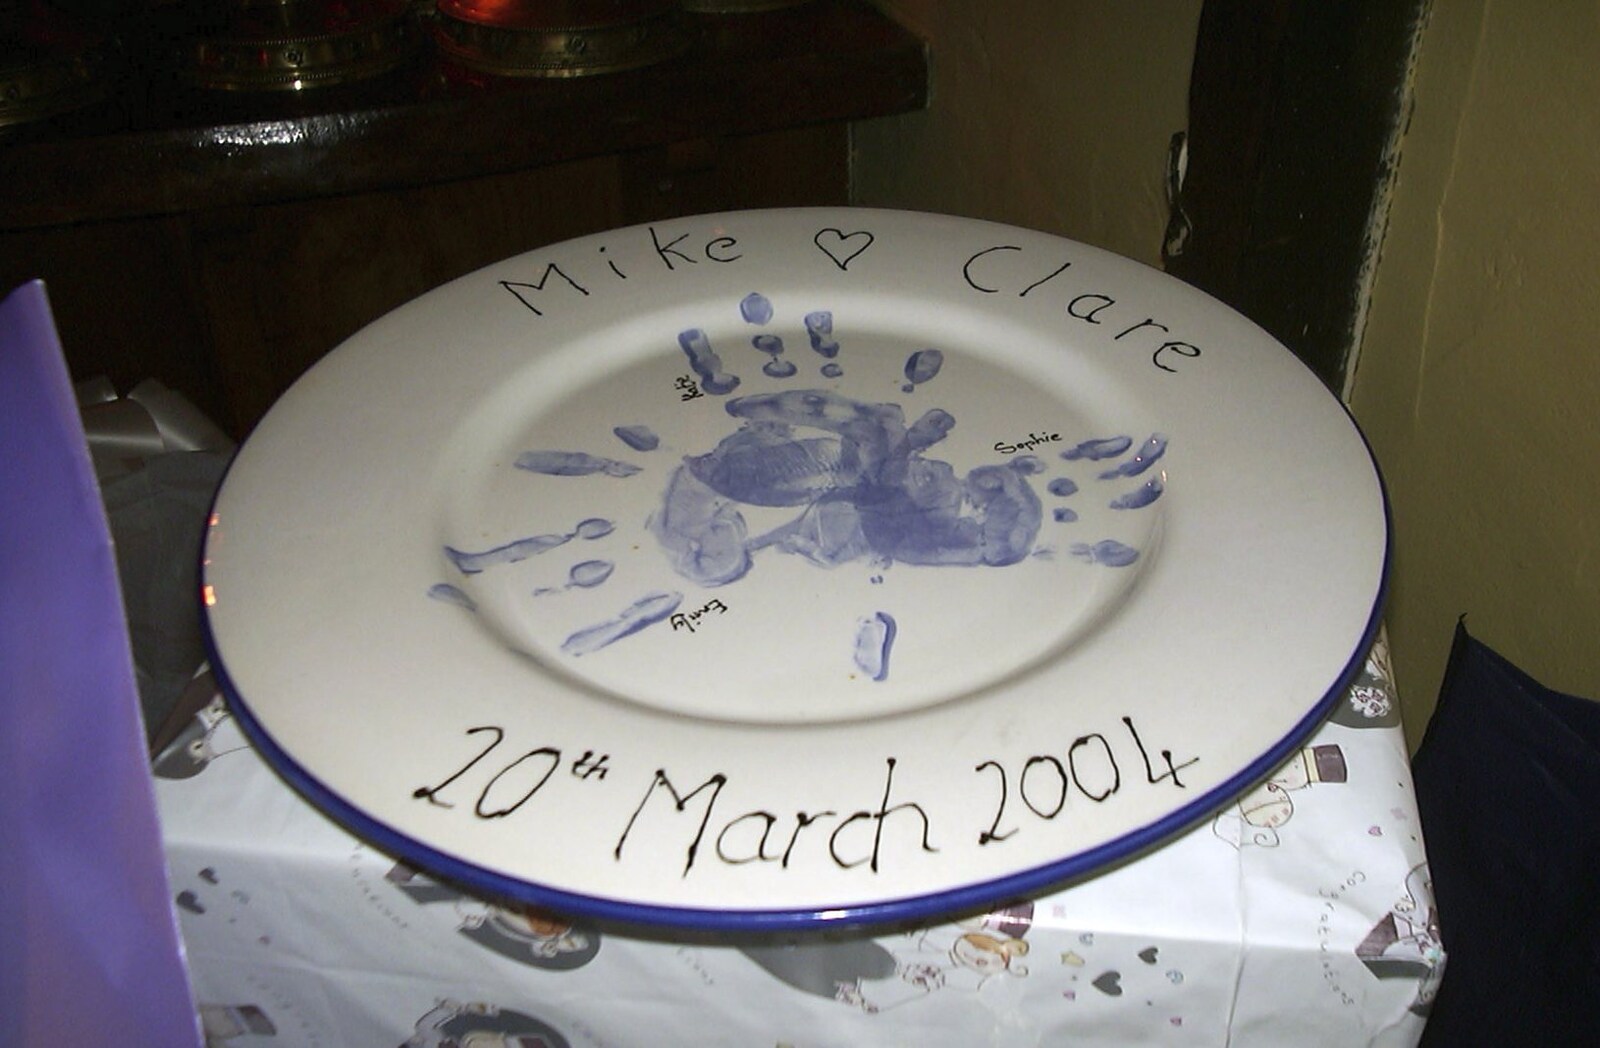 A wedding plate from Mikey-P and Clare's Wedding Reception, Brome Grange, Suffolk - 20th March 2004